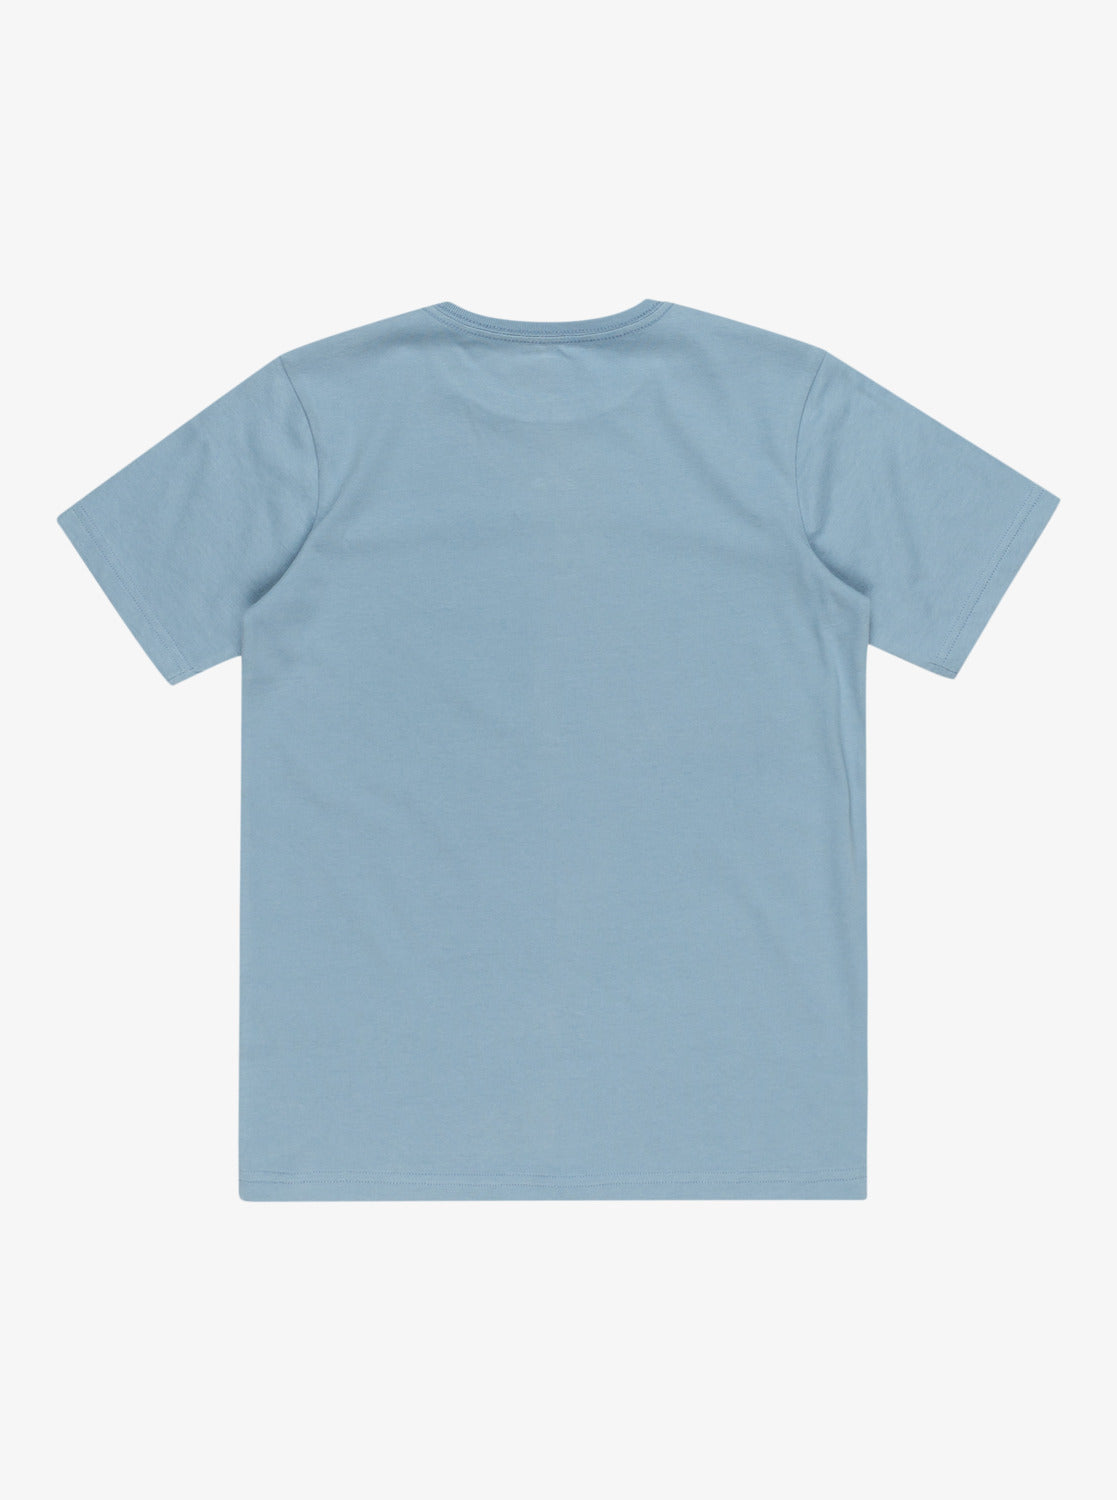 Quiksilver Riding Today Boys T-Shirt in Blue Shadow